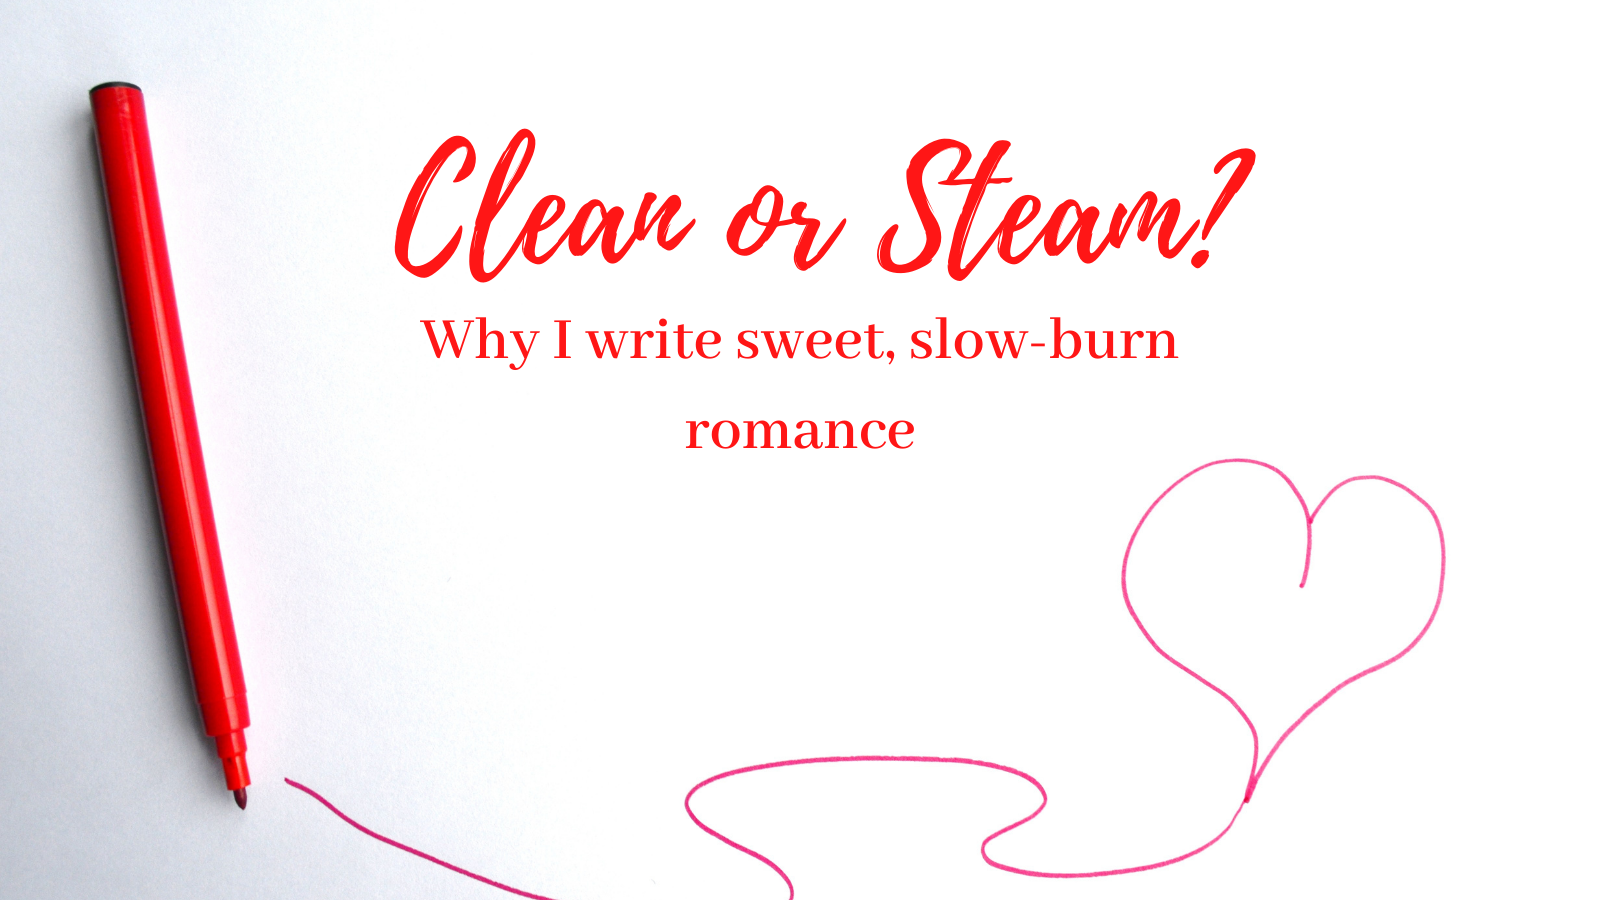 Clean or Steam? Why I absolutely adore writing sweet, slow-burn